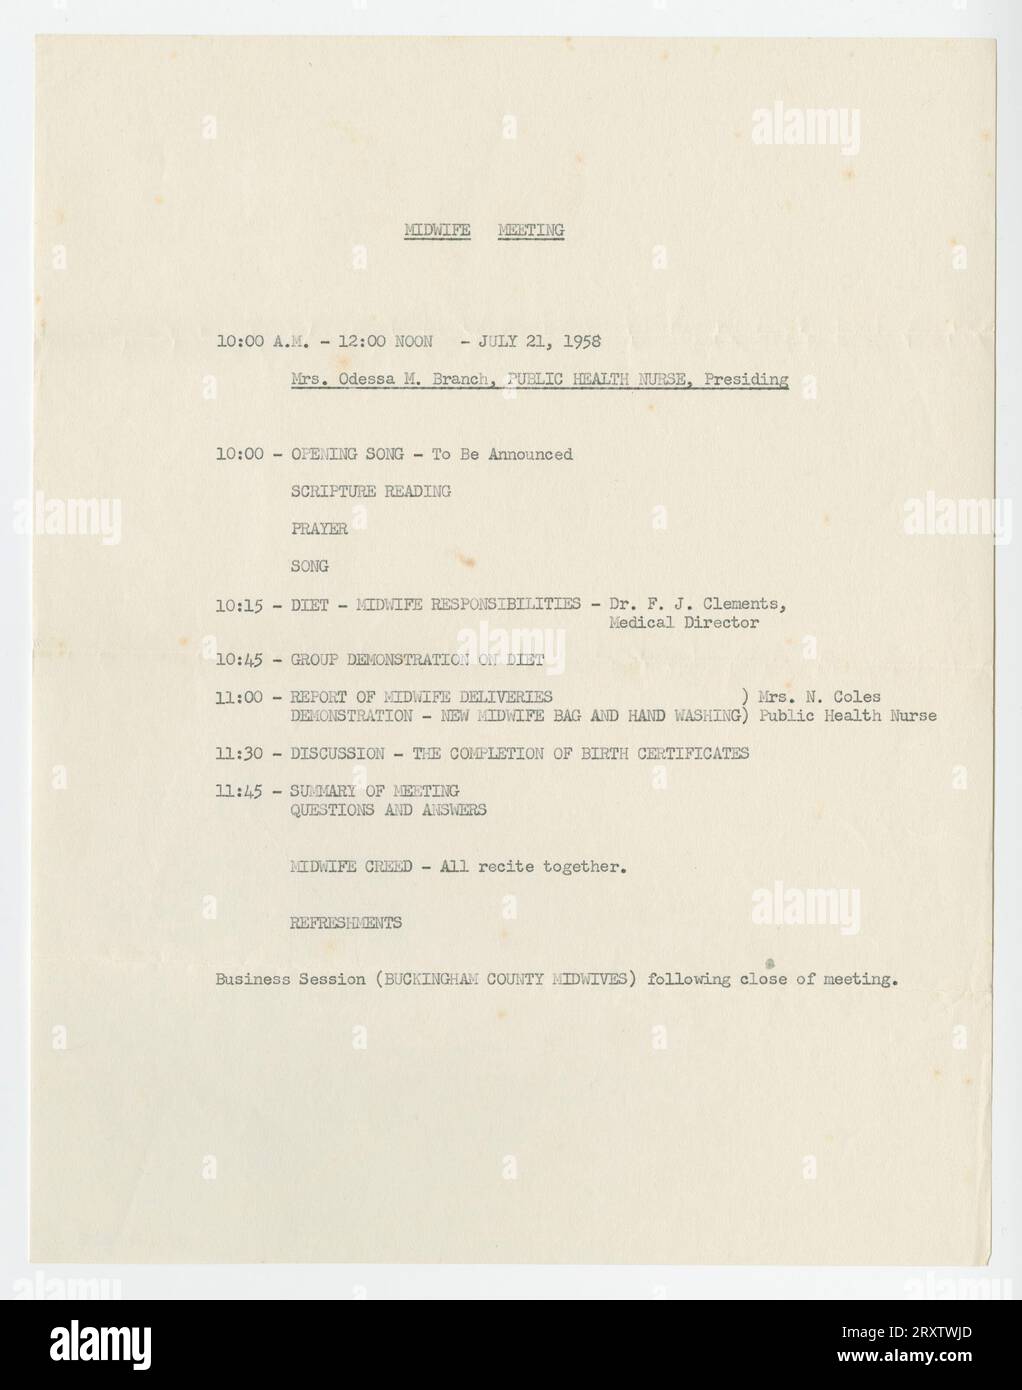 An agenda for a midwife meeting dated July 21, 1958. Agenda items include an opening song, a lecture on midwife responsibilities with respect to diet, and a discussion about the completion of birth certificates. Possibly a carbon copy. Typewritten on white paper. Stock Photo